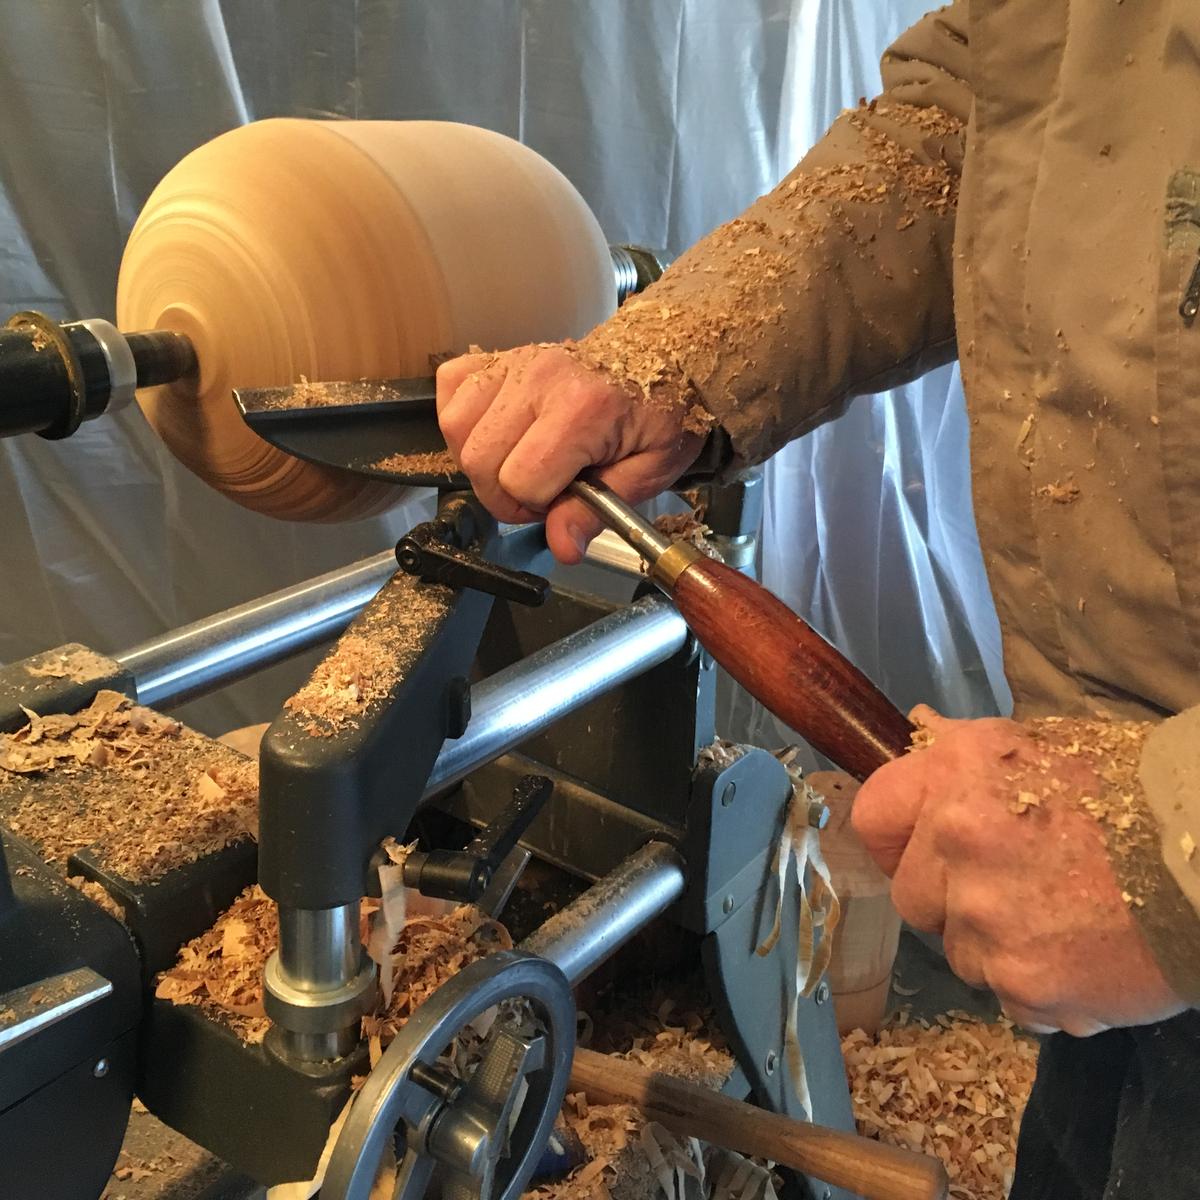 Each chicken begins with a wooden egg-shaped body, crafted on a spinning lathe. (Courtesy of The City Girl Farm)